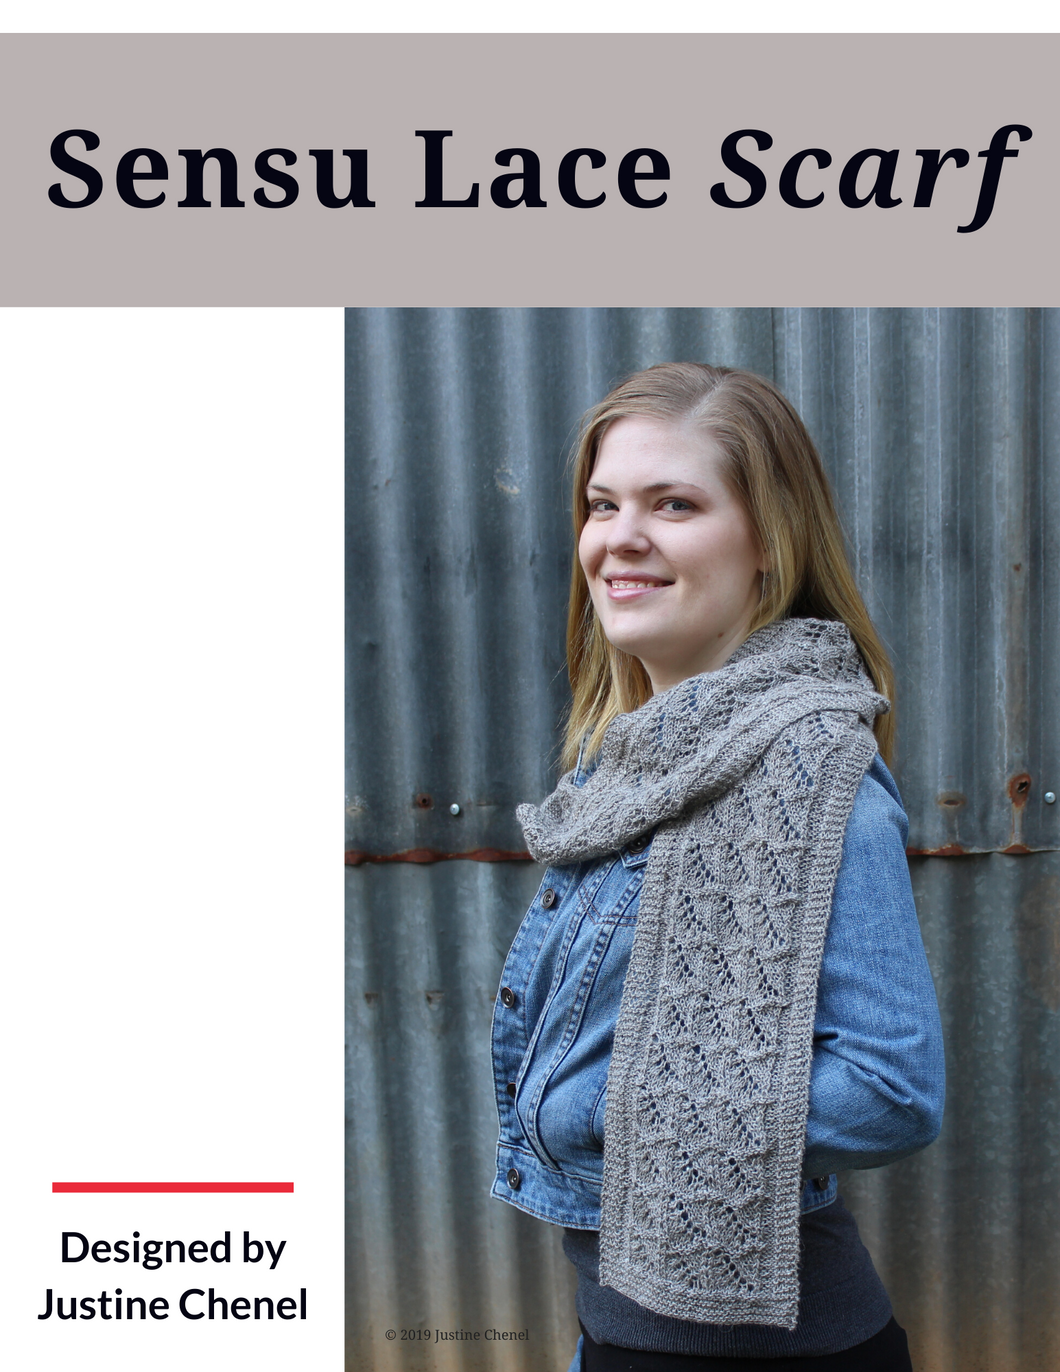 Sensu Lace Scarf (Hard copy with Ravelry download code)